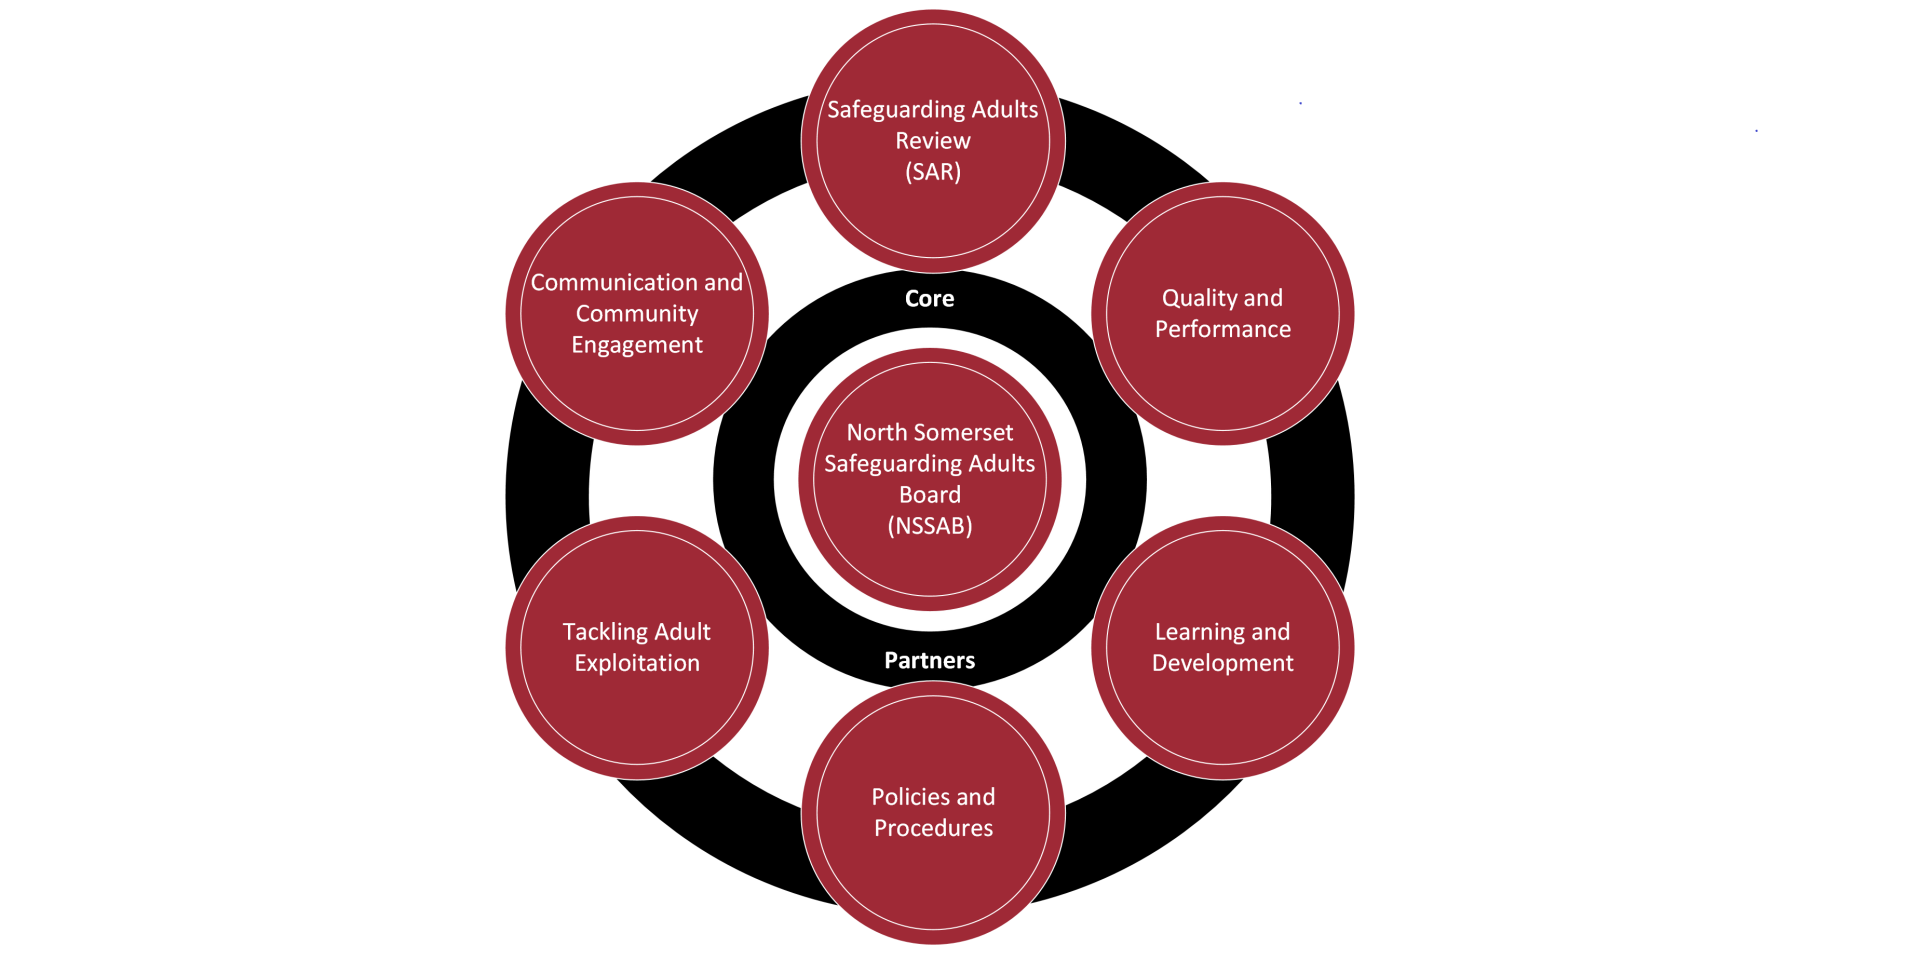 The six subgroups that make up the board are Safeguarding Adults Review, Quality and Performance, Learning and Development, Policies and Procedures, Tackling Adult Exploitation, and Communication and Community Engagement.